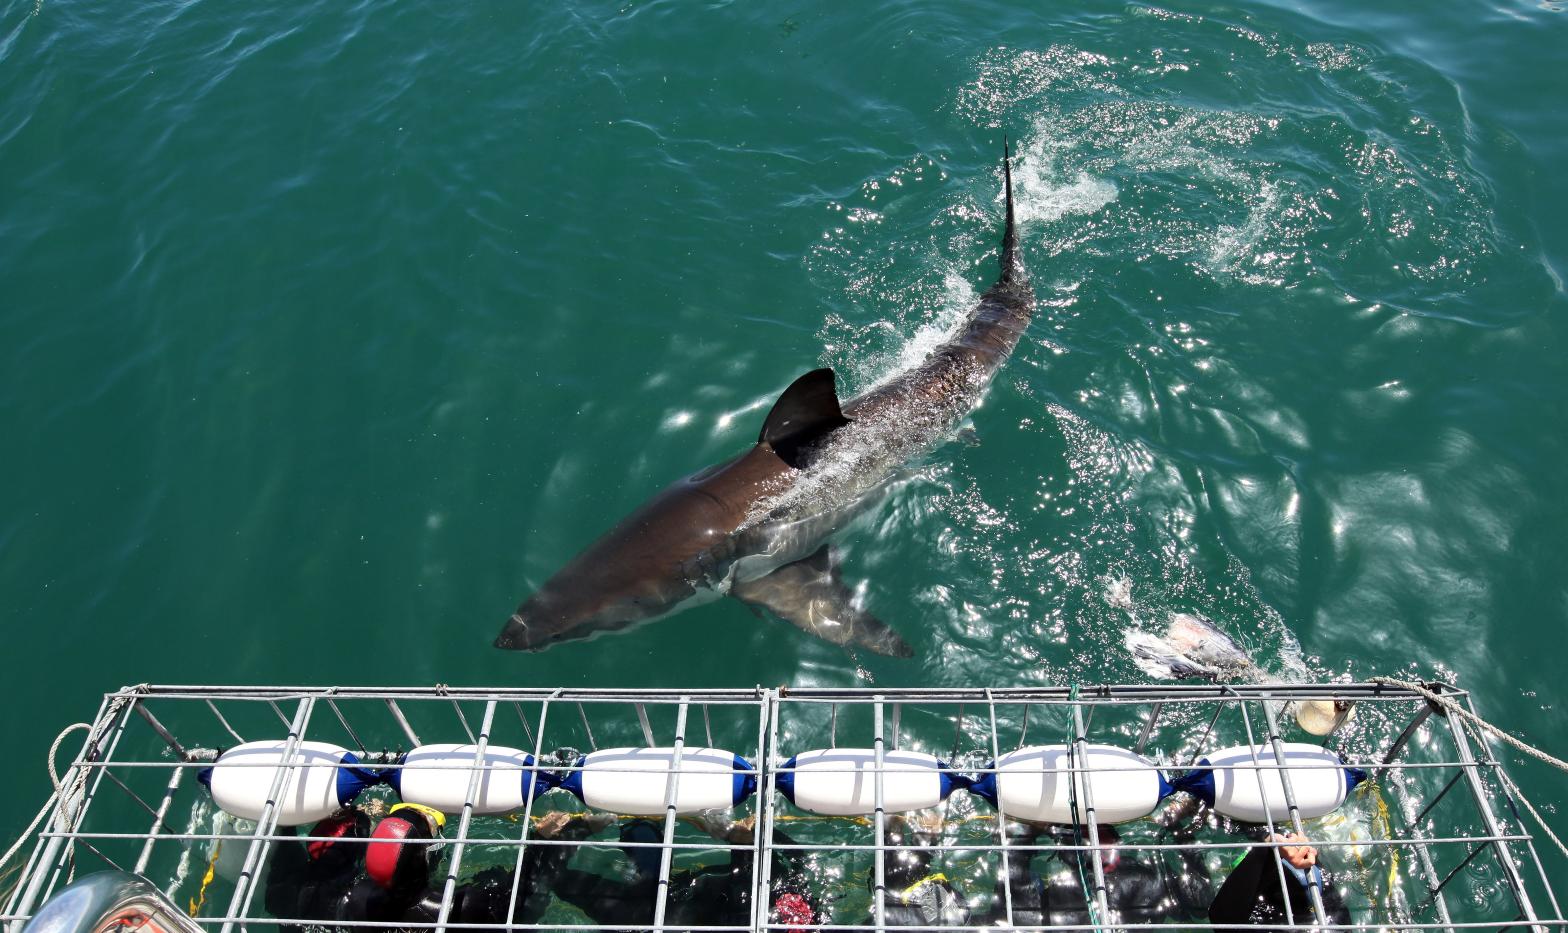 A white shark investigates a diving cage off South Africa. (Photo: Dan Kitwood, Getty Images)